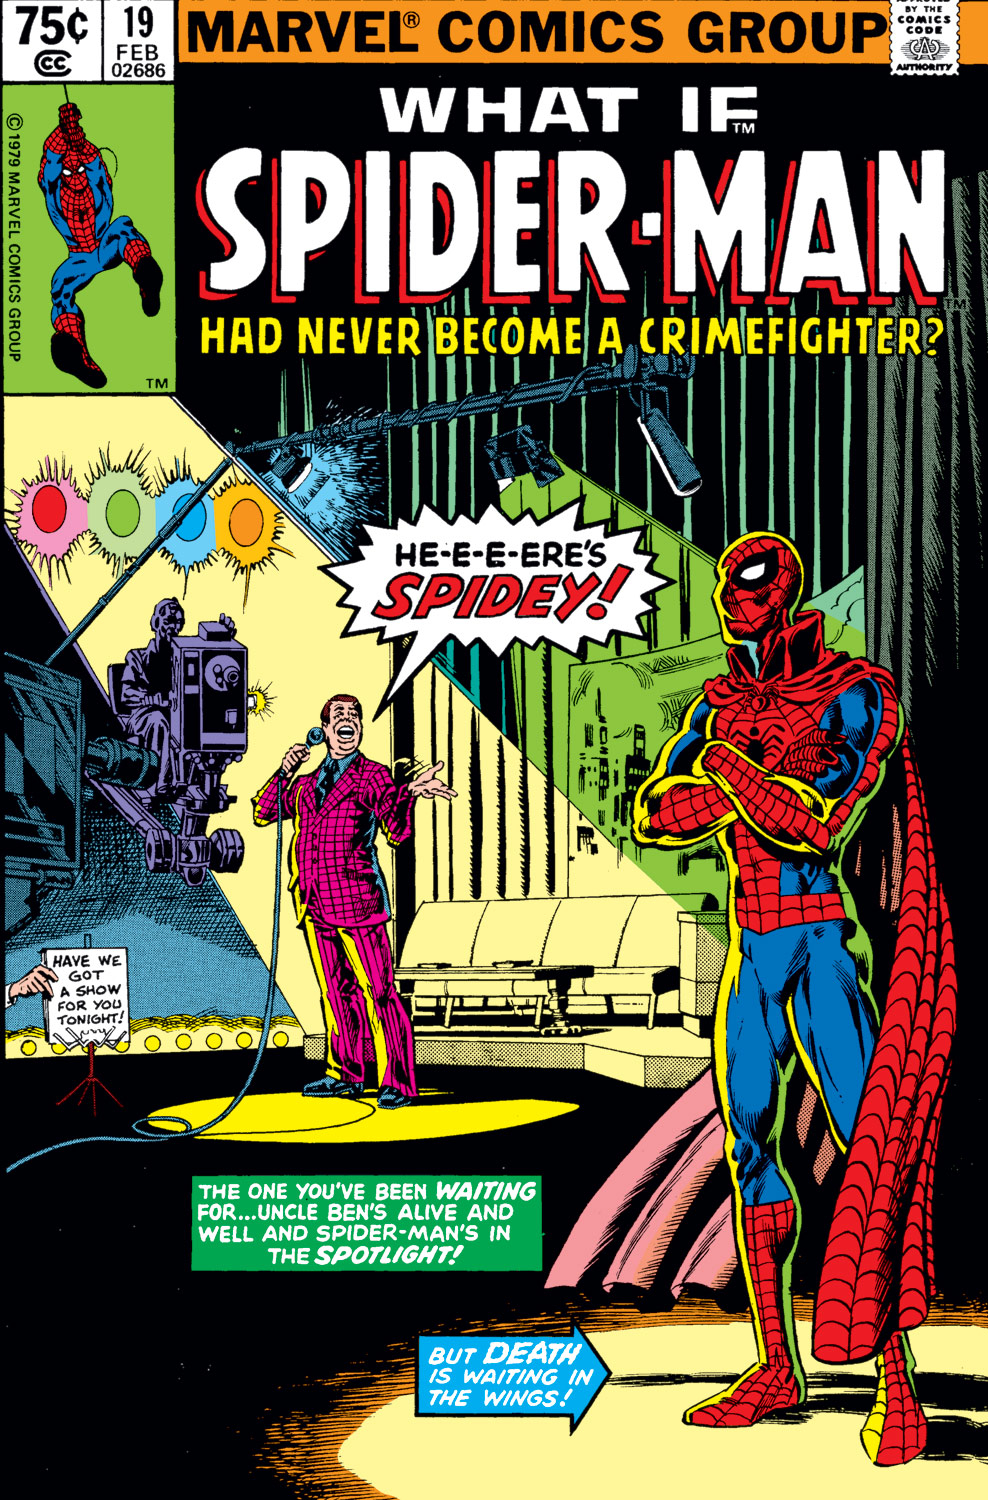 What If? (1977) Issue #19 - Spider-Man had never become a crimefighter #19 - English 1